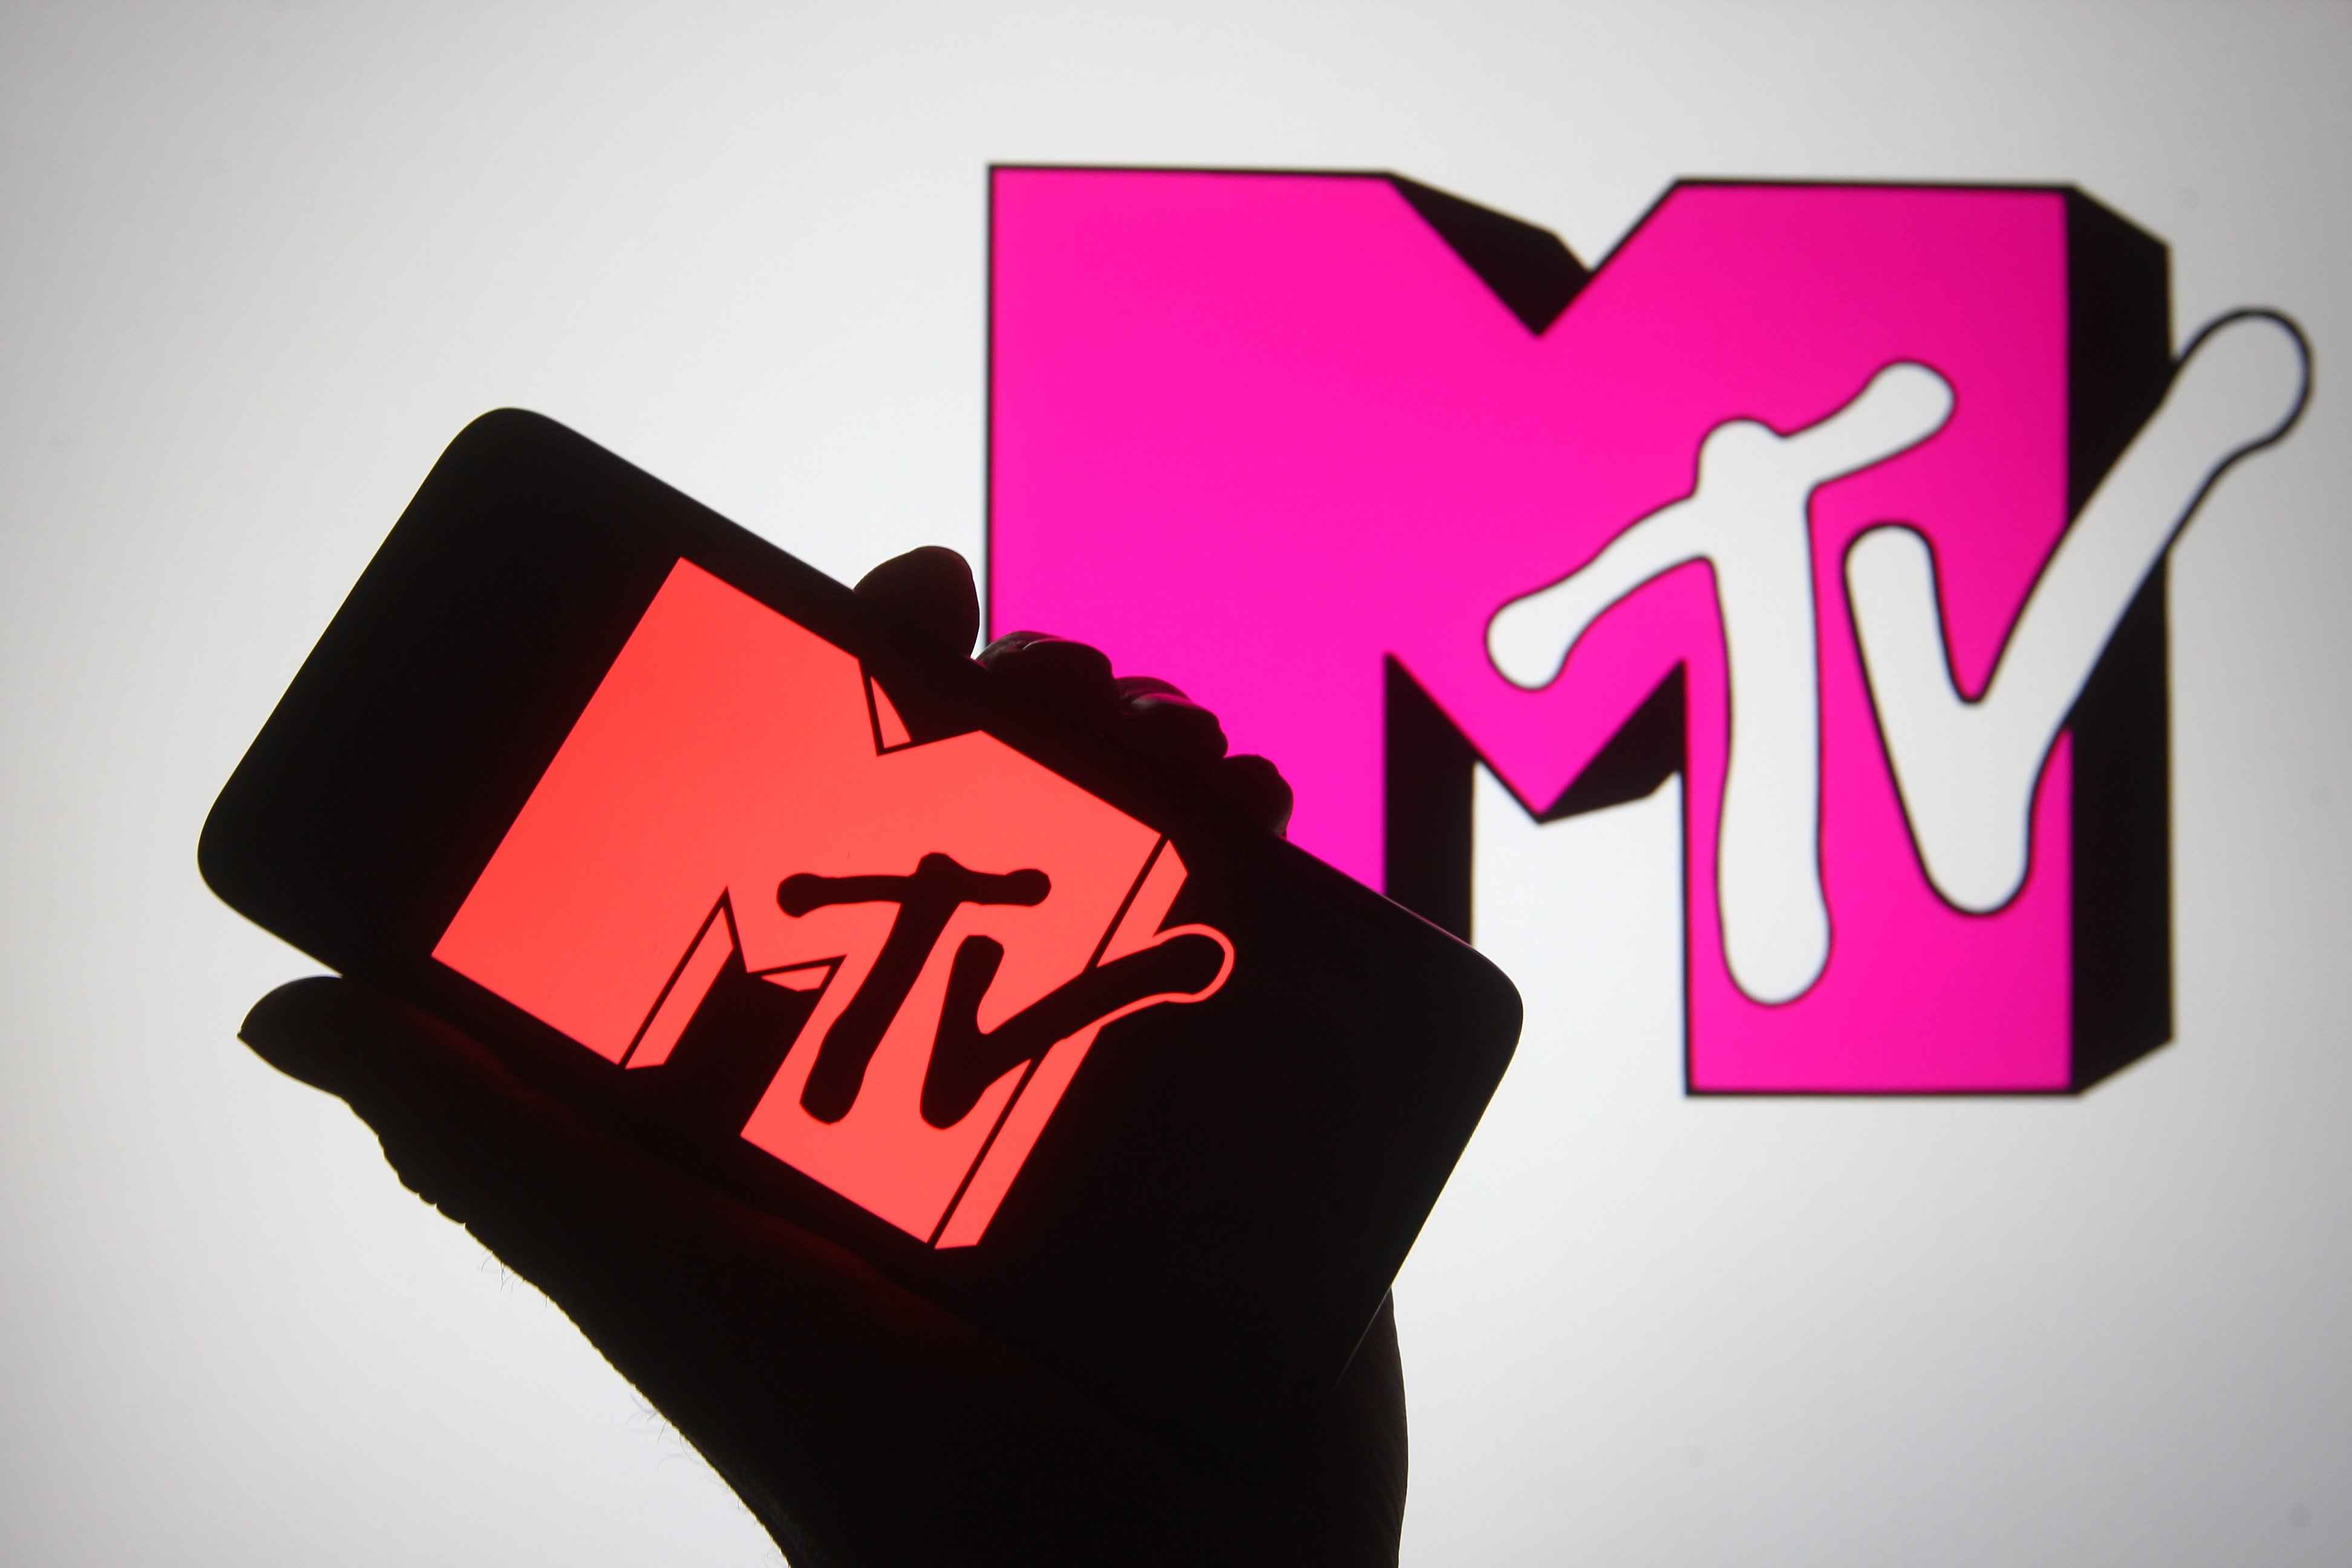 A silhouette hand holding a smartphone with MTV channel logo on its screen